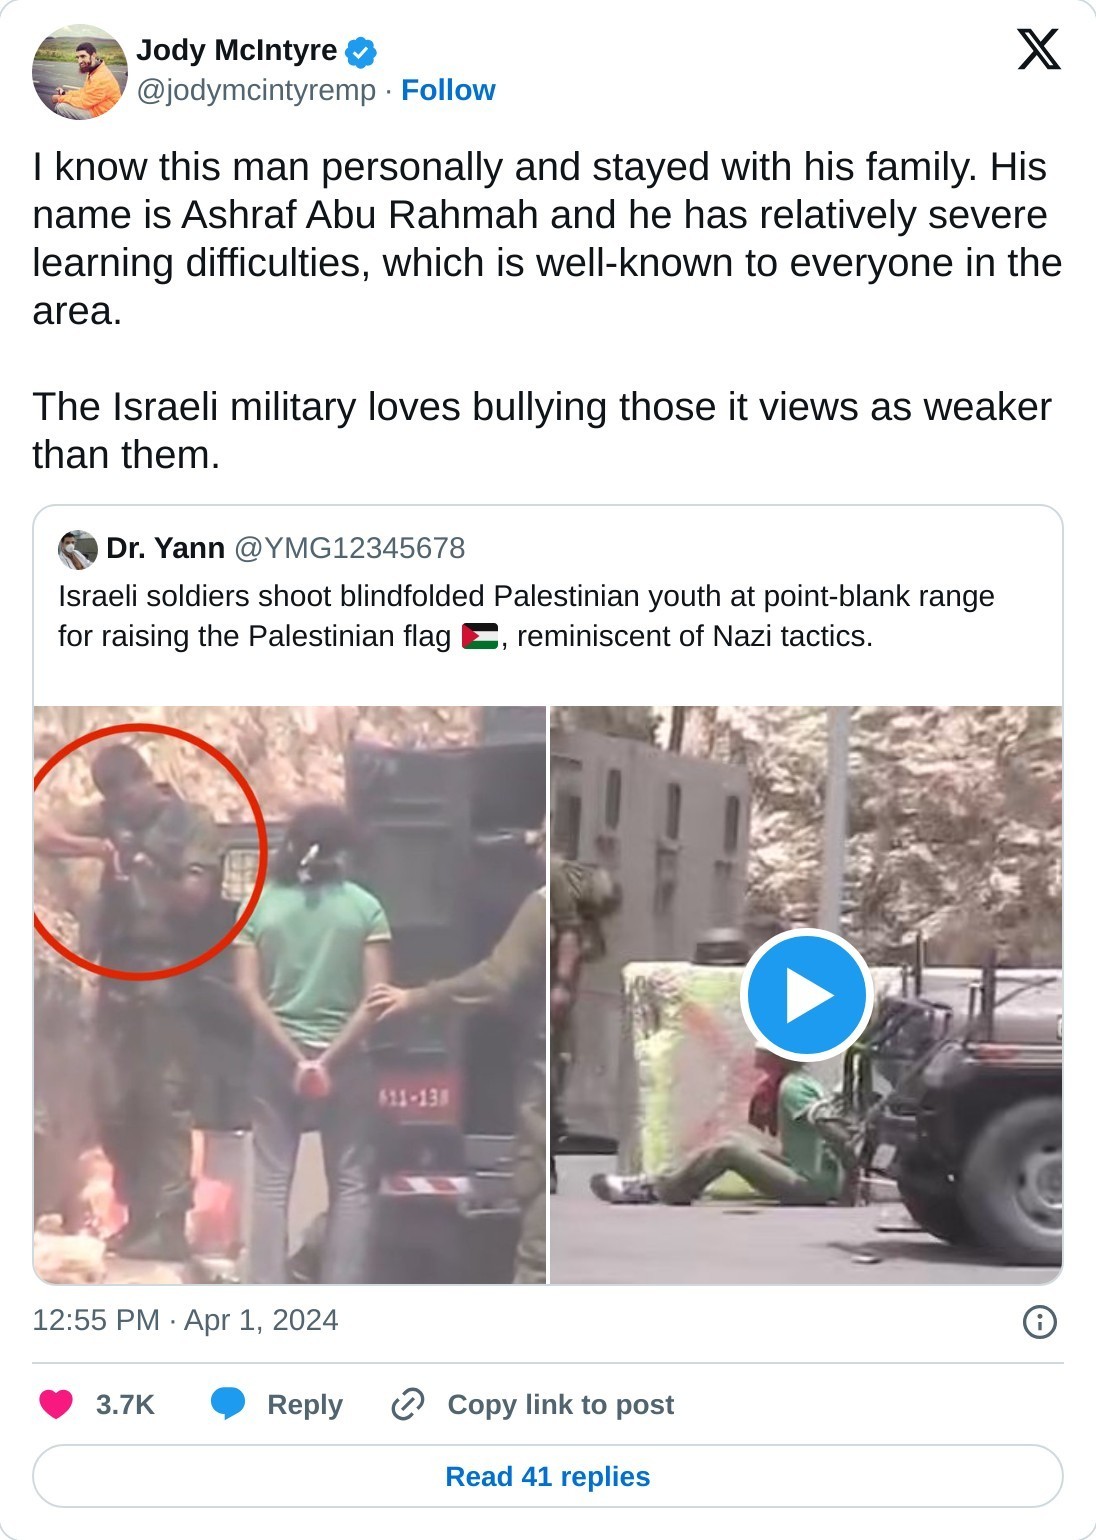 I know this man personally and stayed with his family. His name is Ashraf Abu Rahmah and he has relatively severe learning difficulties, which is well-known to everyone in the area.  The Israeli military loves bullying those it views as weaker than them. https://t.co/hlmSmWT7Me  — Jody McIntyre (@jodymcintyremp) April 1, 2024